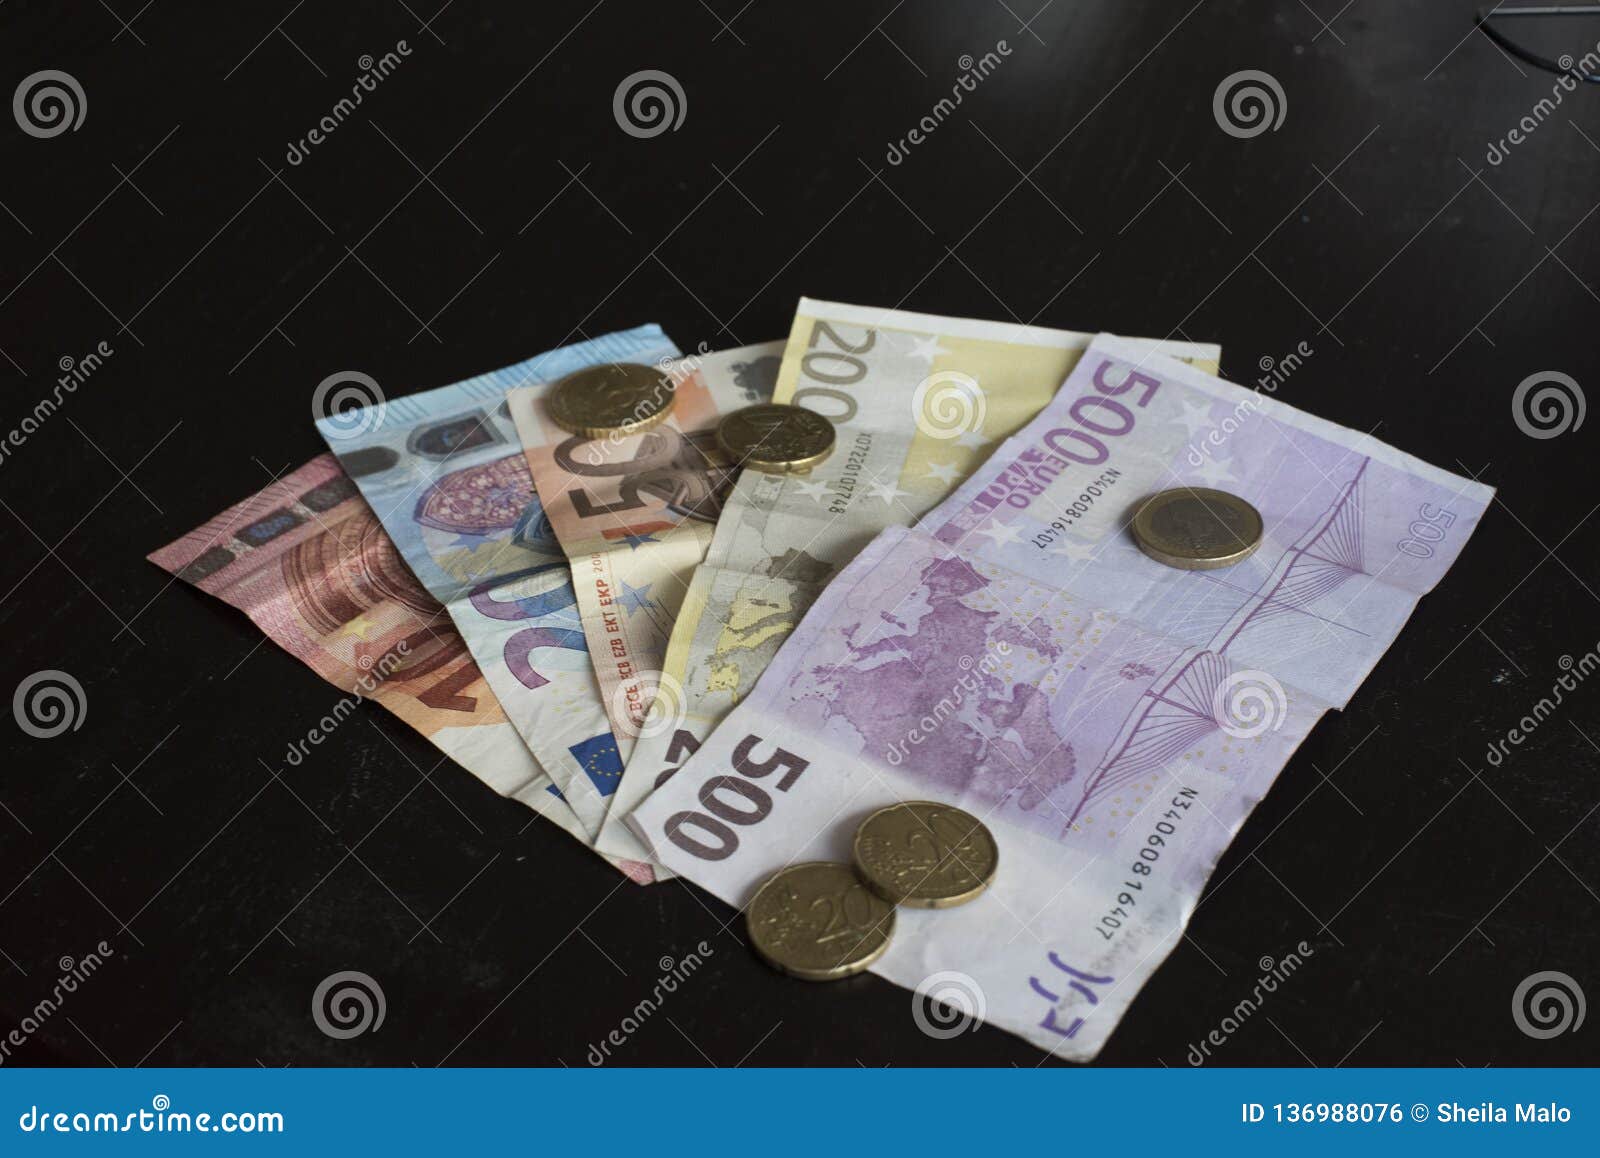 money bills and euro coins on a table